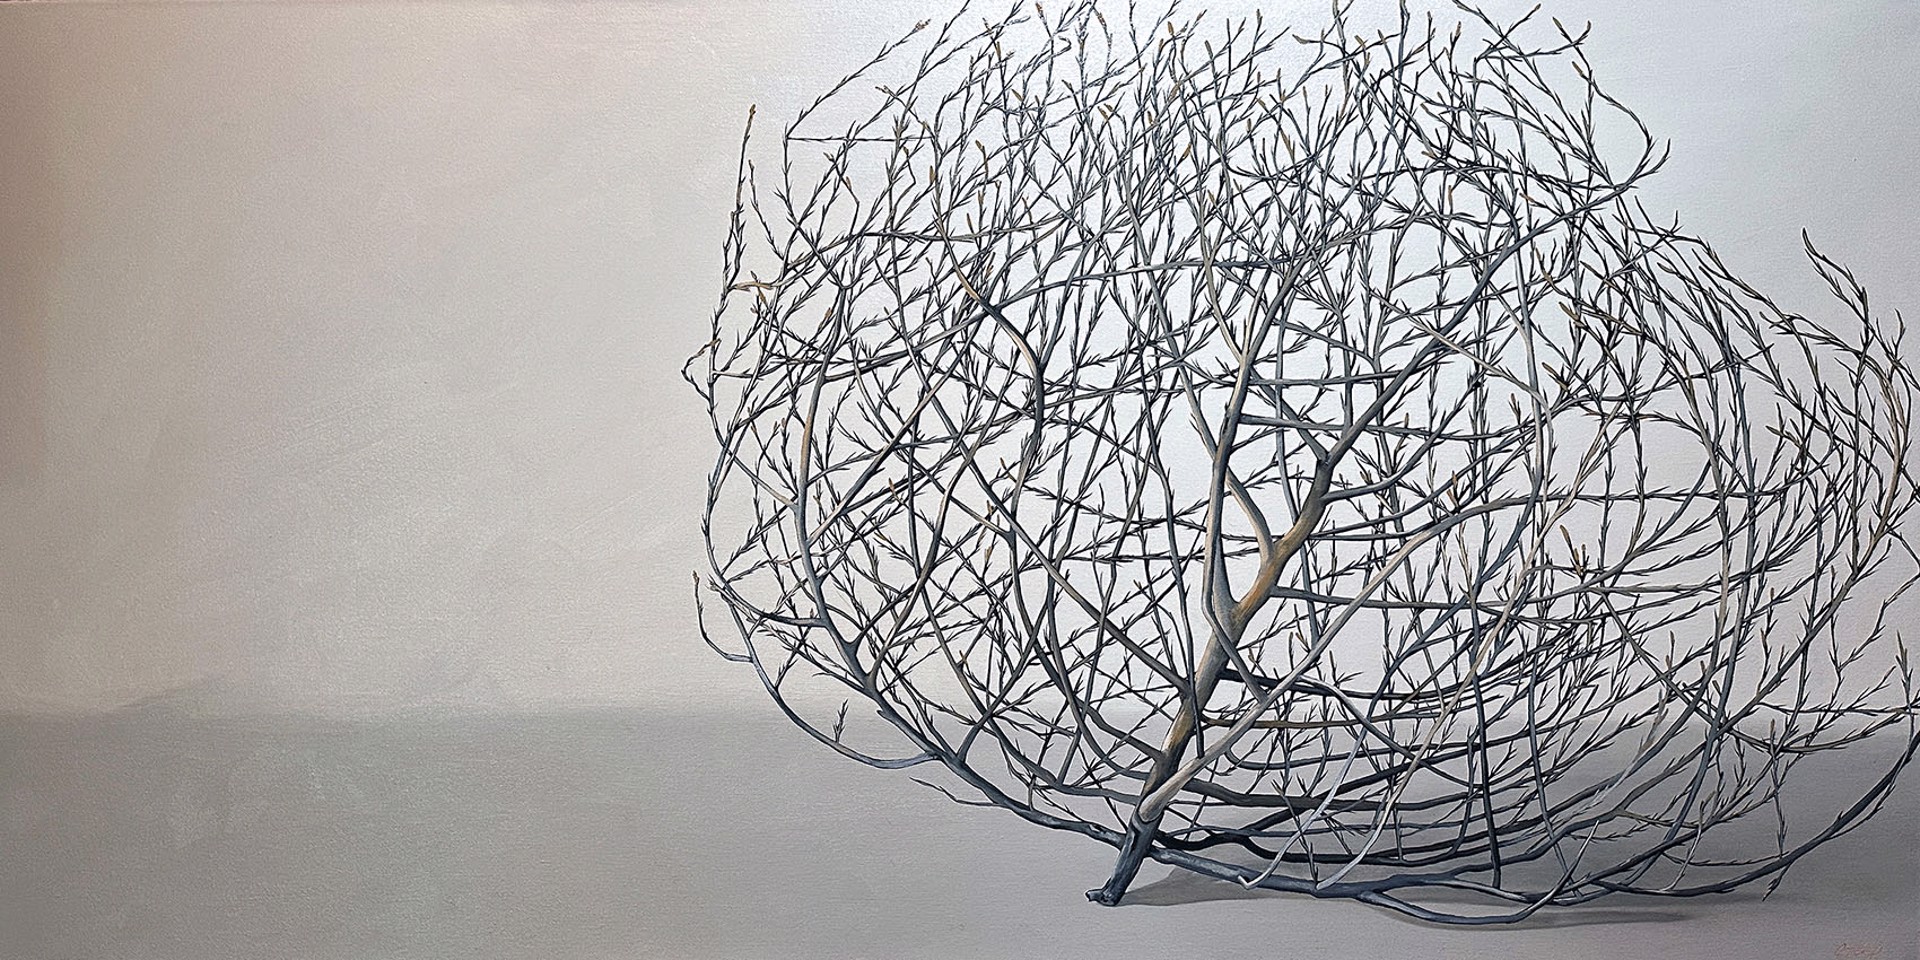 Original Oil Painting By Christy Stallop Featuring A Tumbleweed In Grayscale On Gray Background